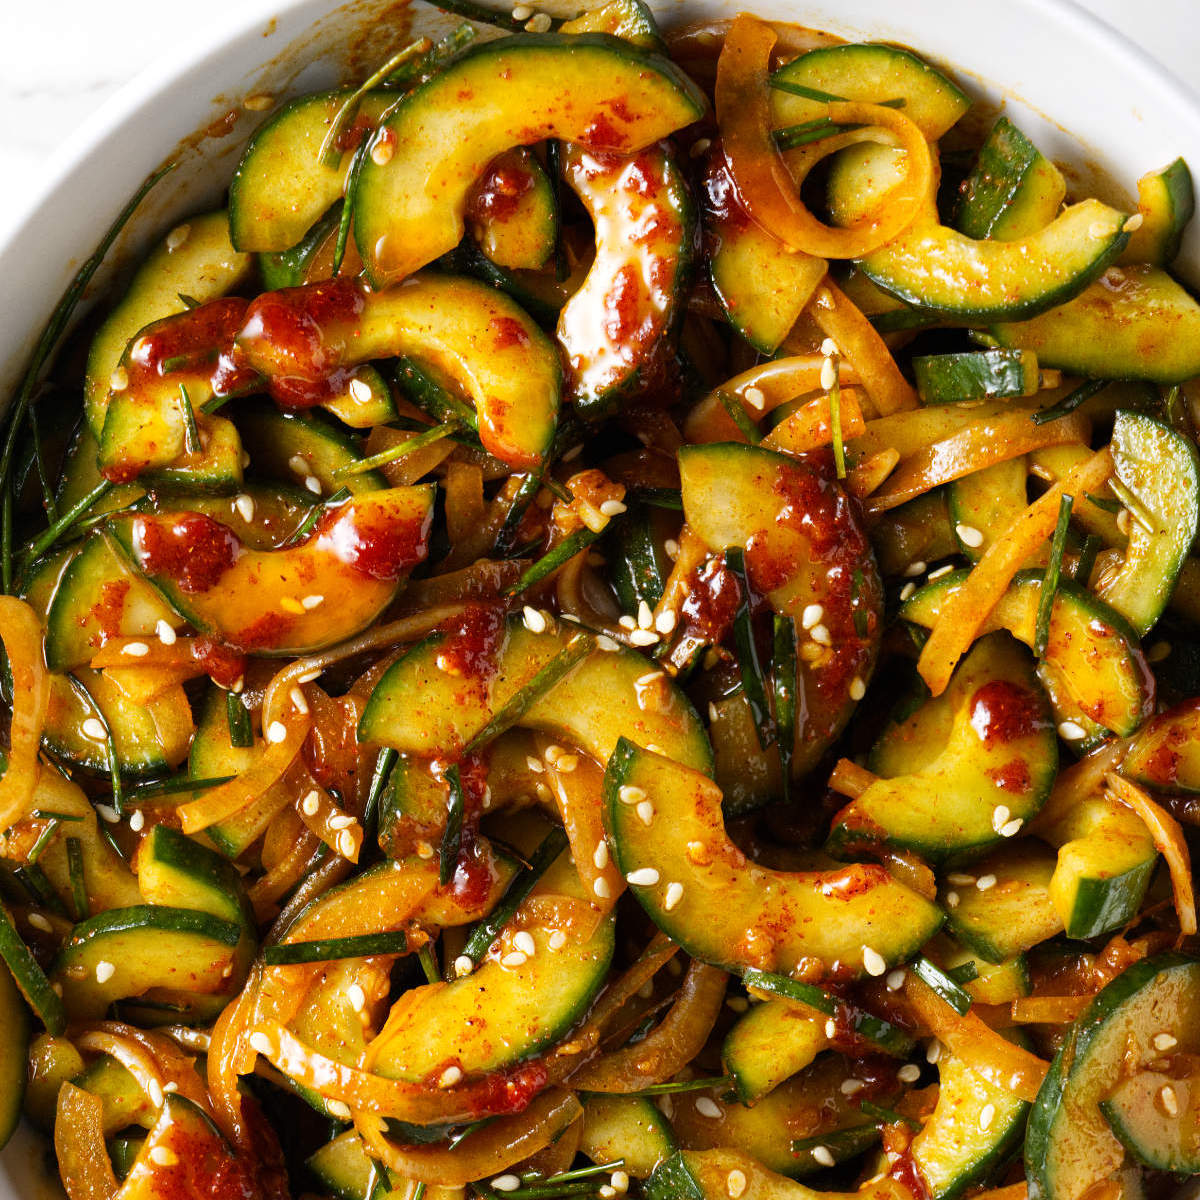 A serving bowl filled with Korean cucumber salad.